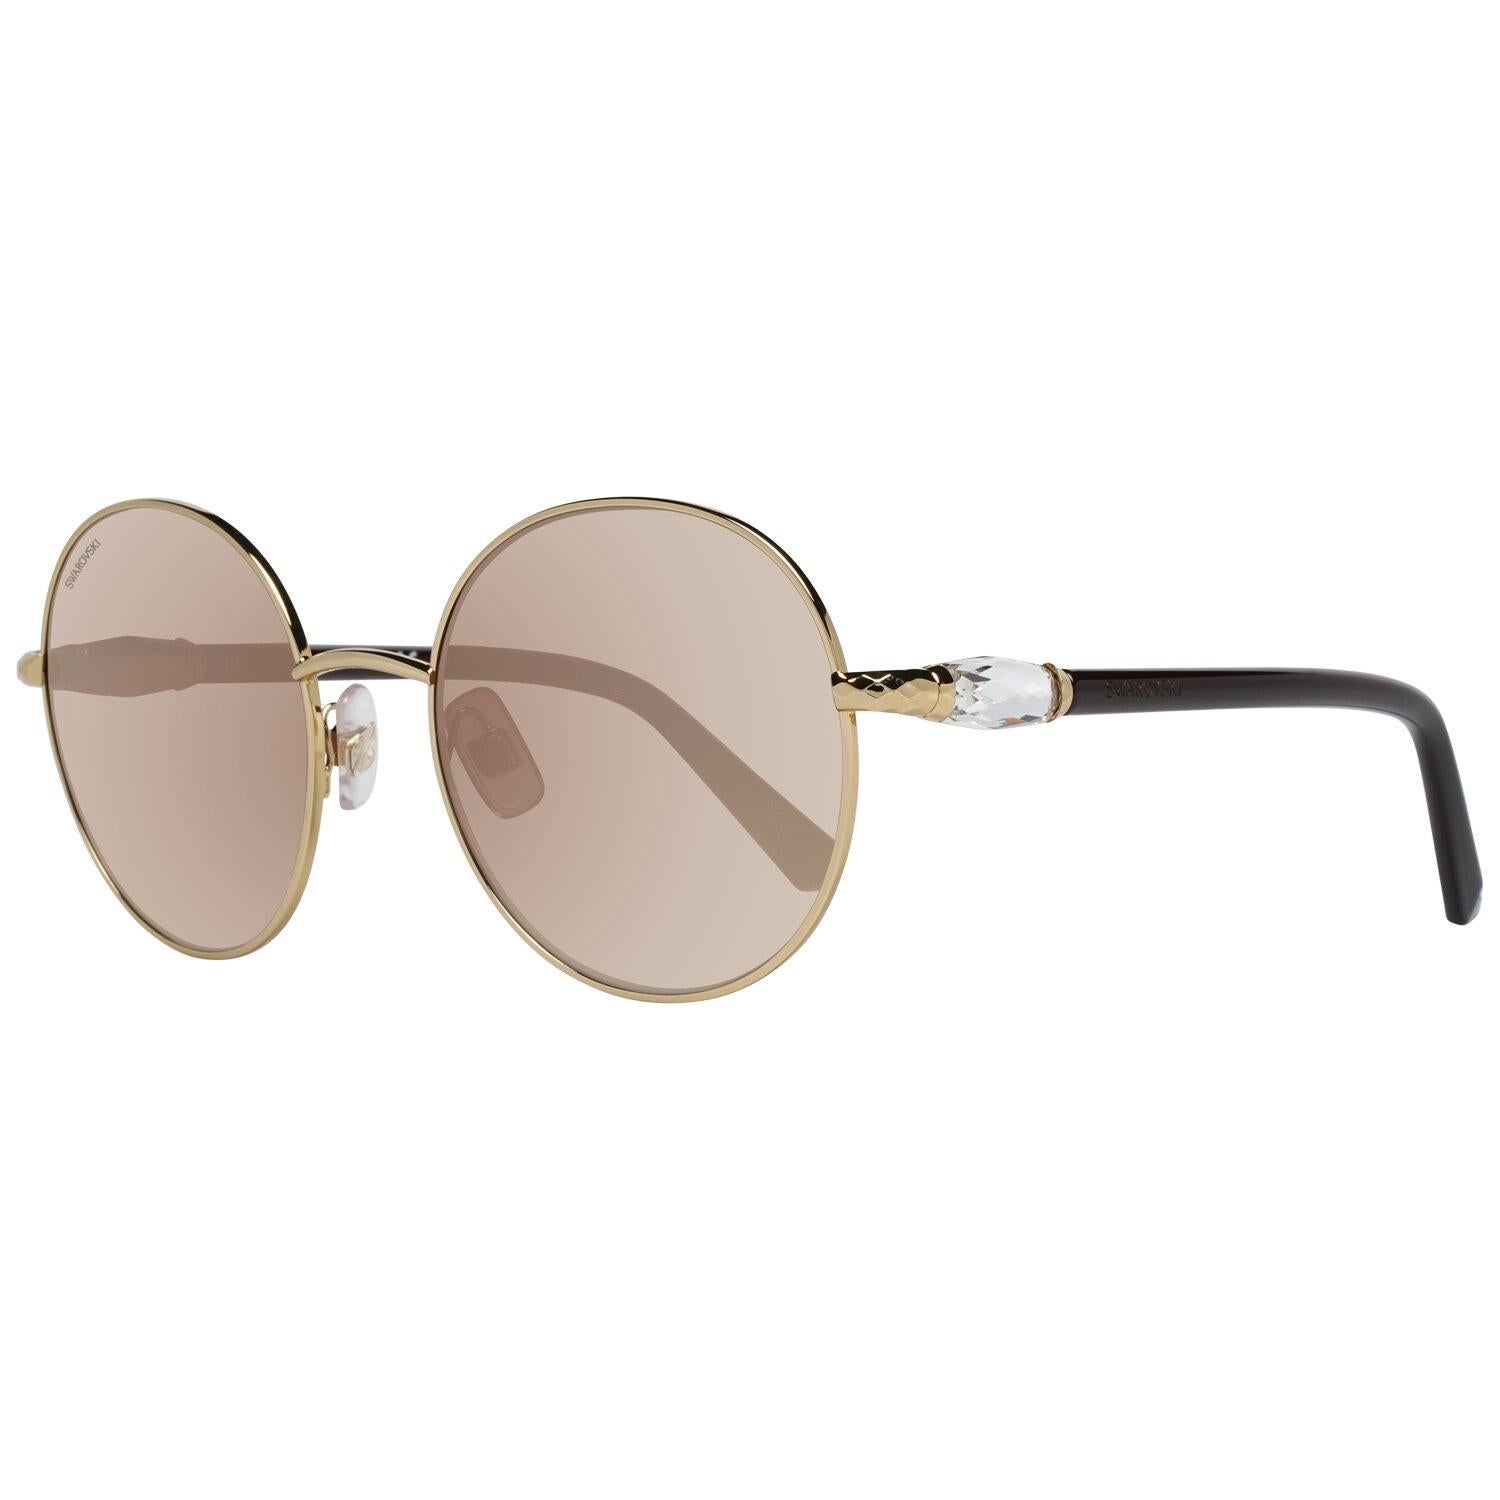 DetailsMATERIAL: MetalCOLOR: GoldMODEL: SK0260 5530GGENDER: WomenCOUNTRY OF MANUFACTURE: ChinaTYPE: SunglassesORIGINAL CASE?: YesSTYLE: OvalOCCASION: CasualFEATURES: LightweightLENS COLOR: BrownLENS TECHNOLOGY: MirroredYEAR MANUFACTURED: